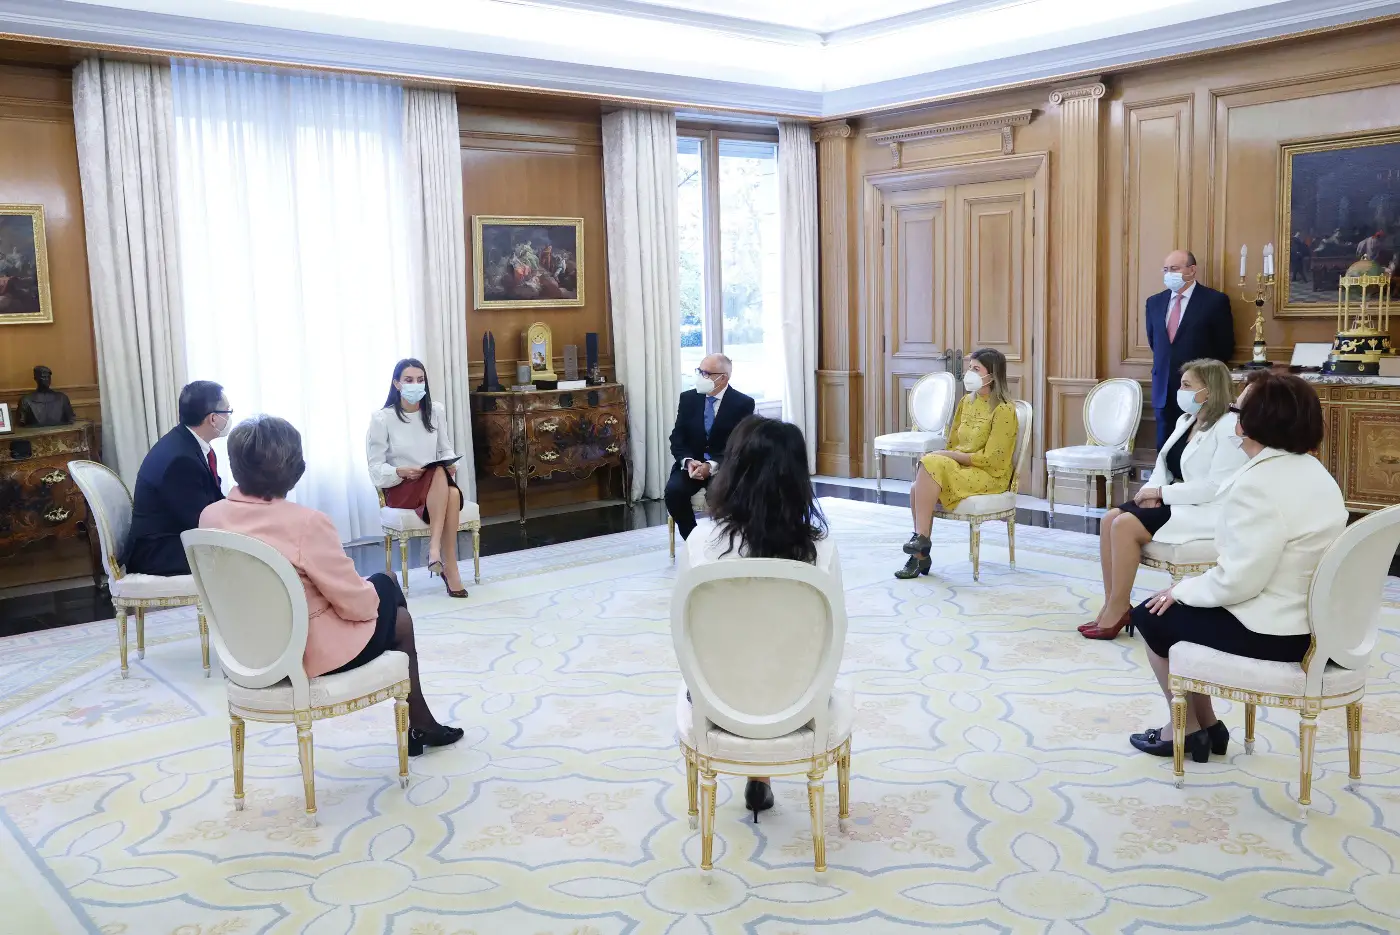 Queen Letizia of Spain received the board of directors of the International Telephone of Hope Association